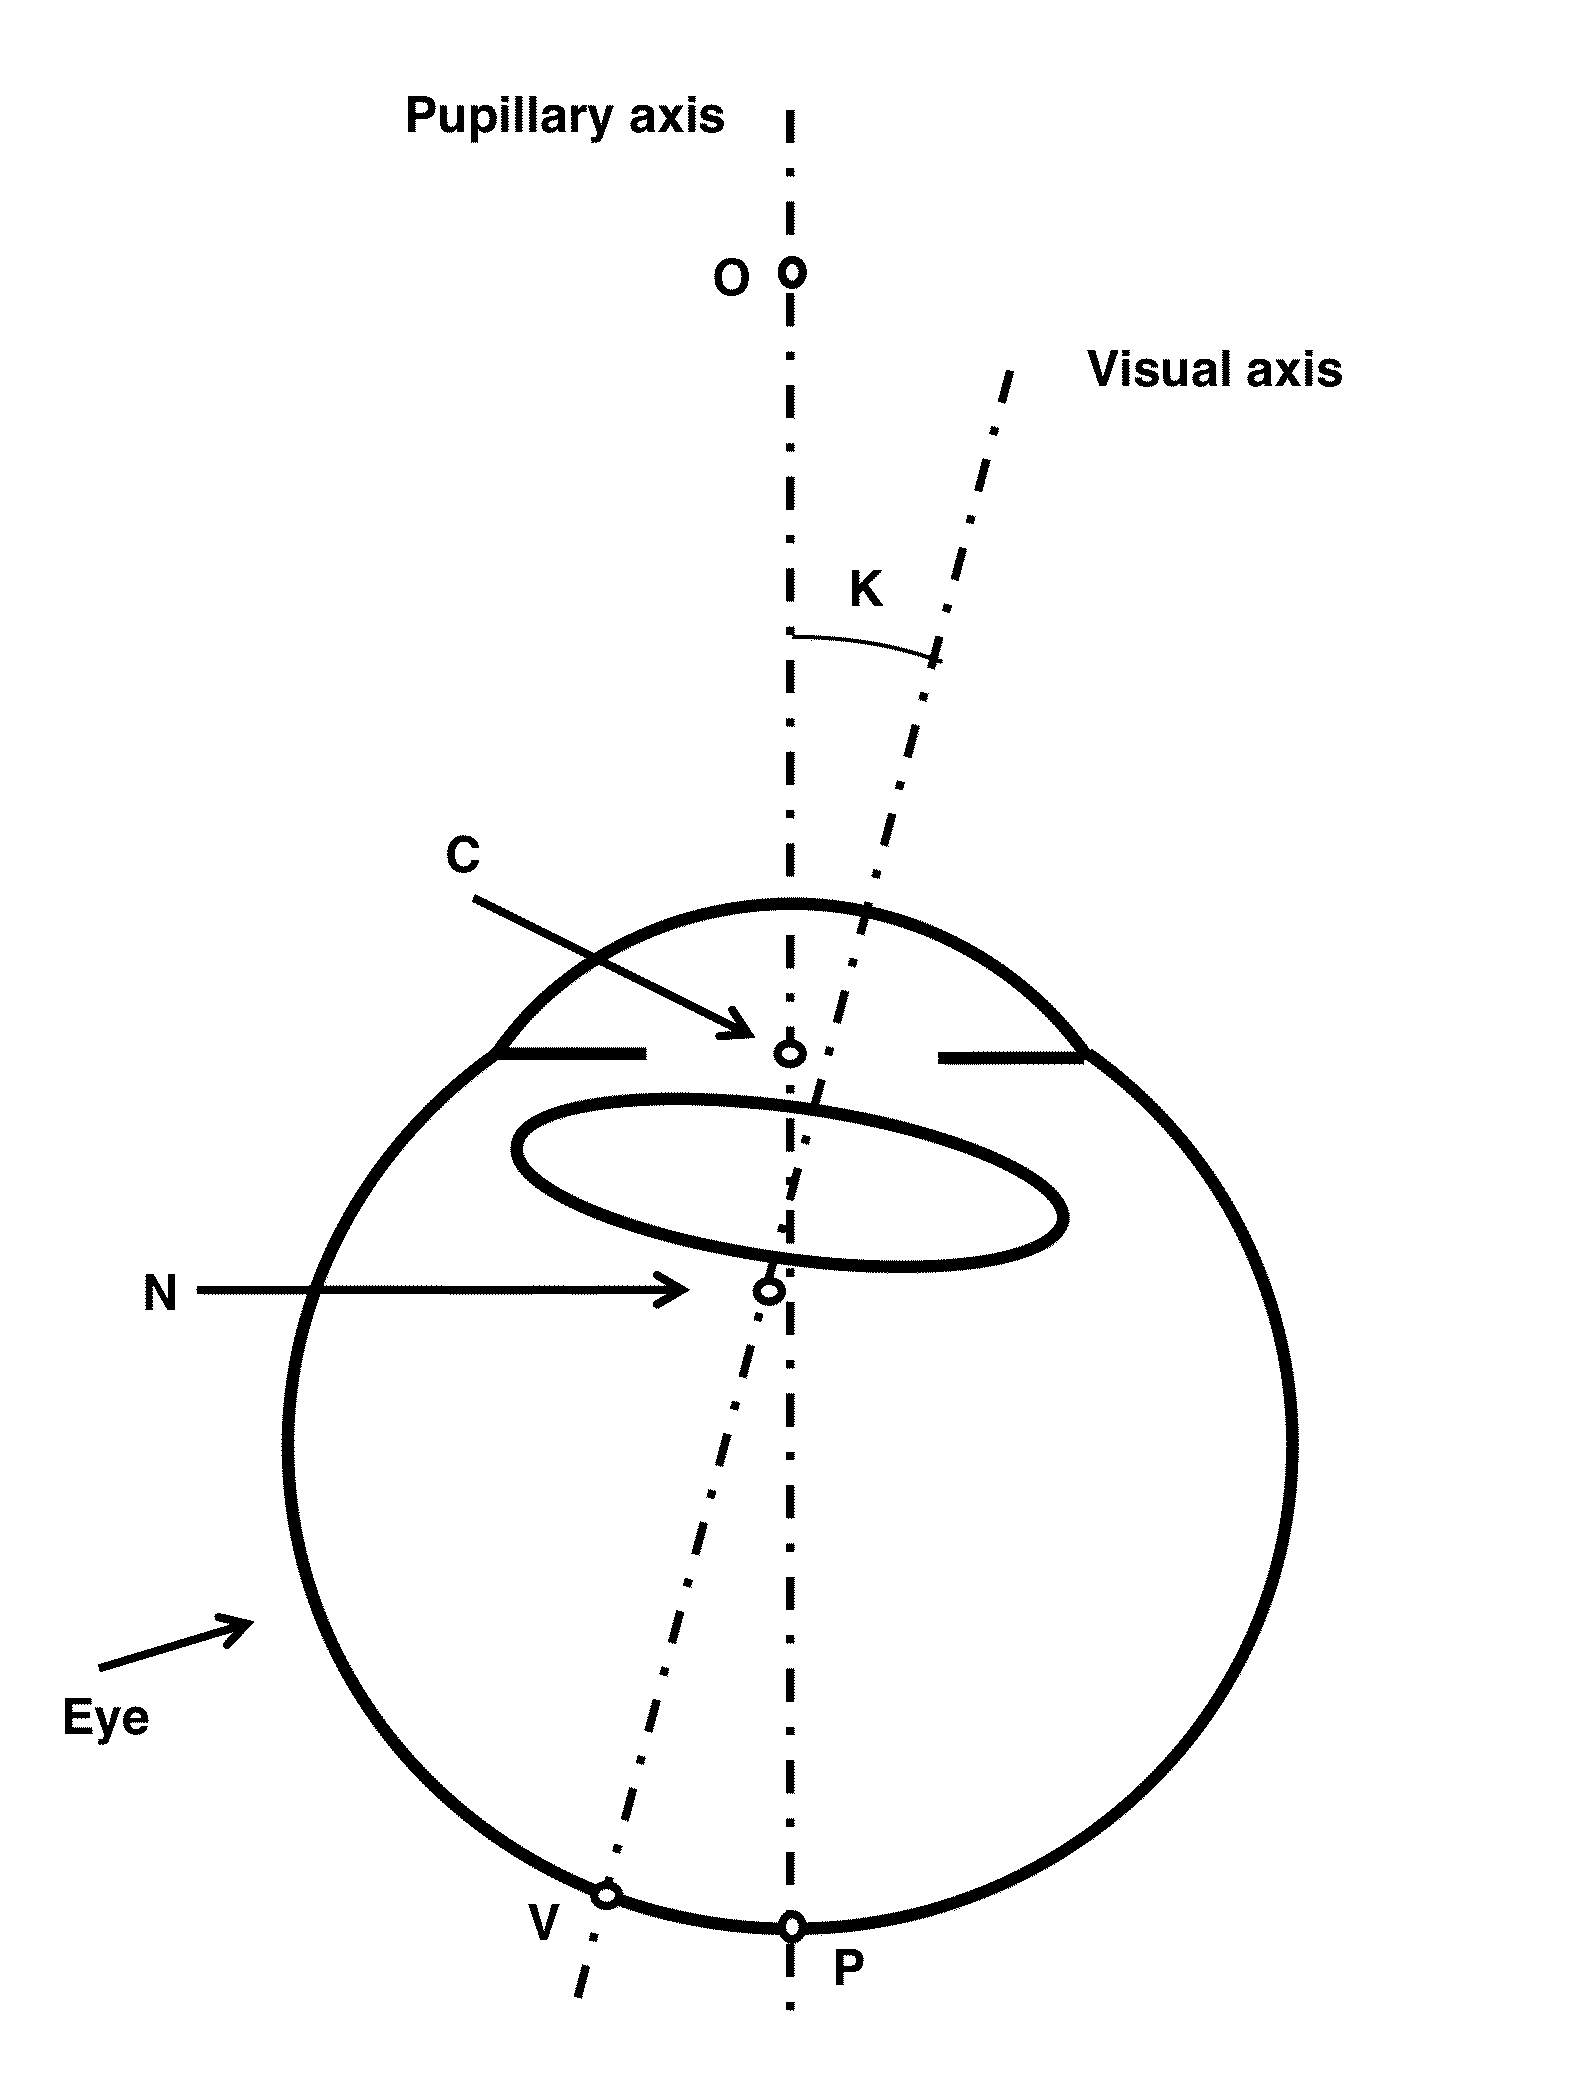 Methods for objectively determining the visual axis of the eye and measuring its refraction